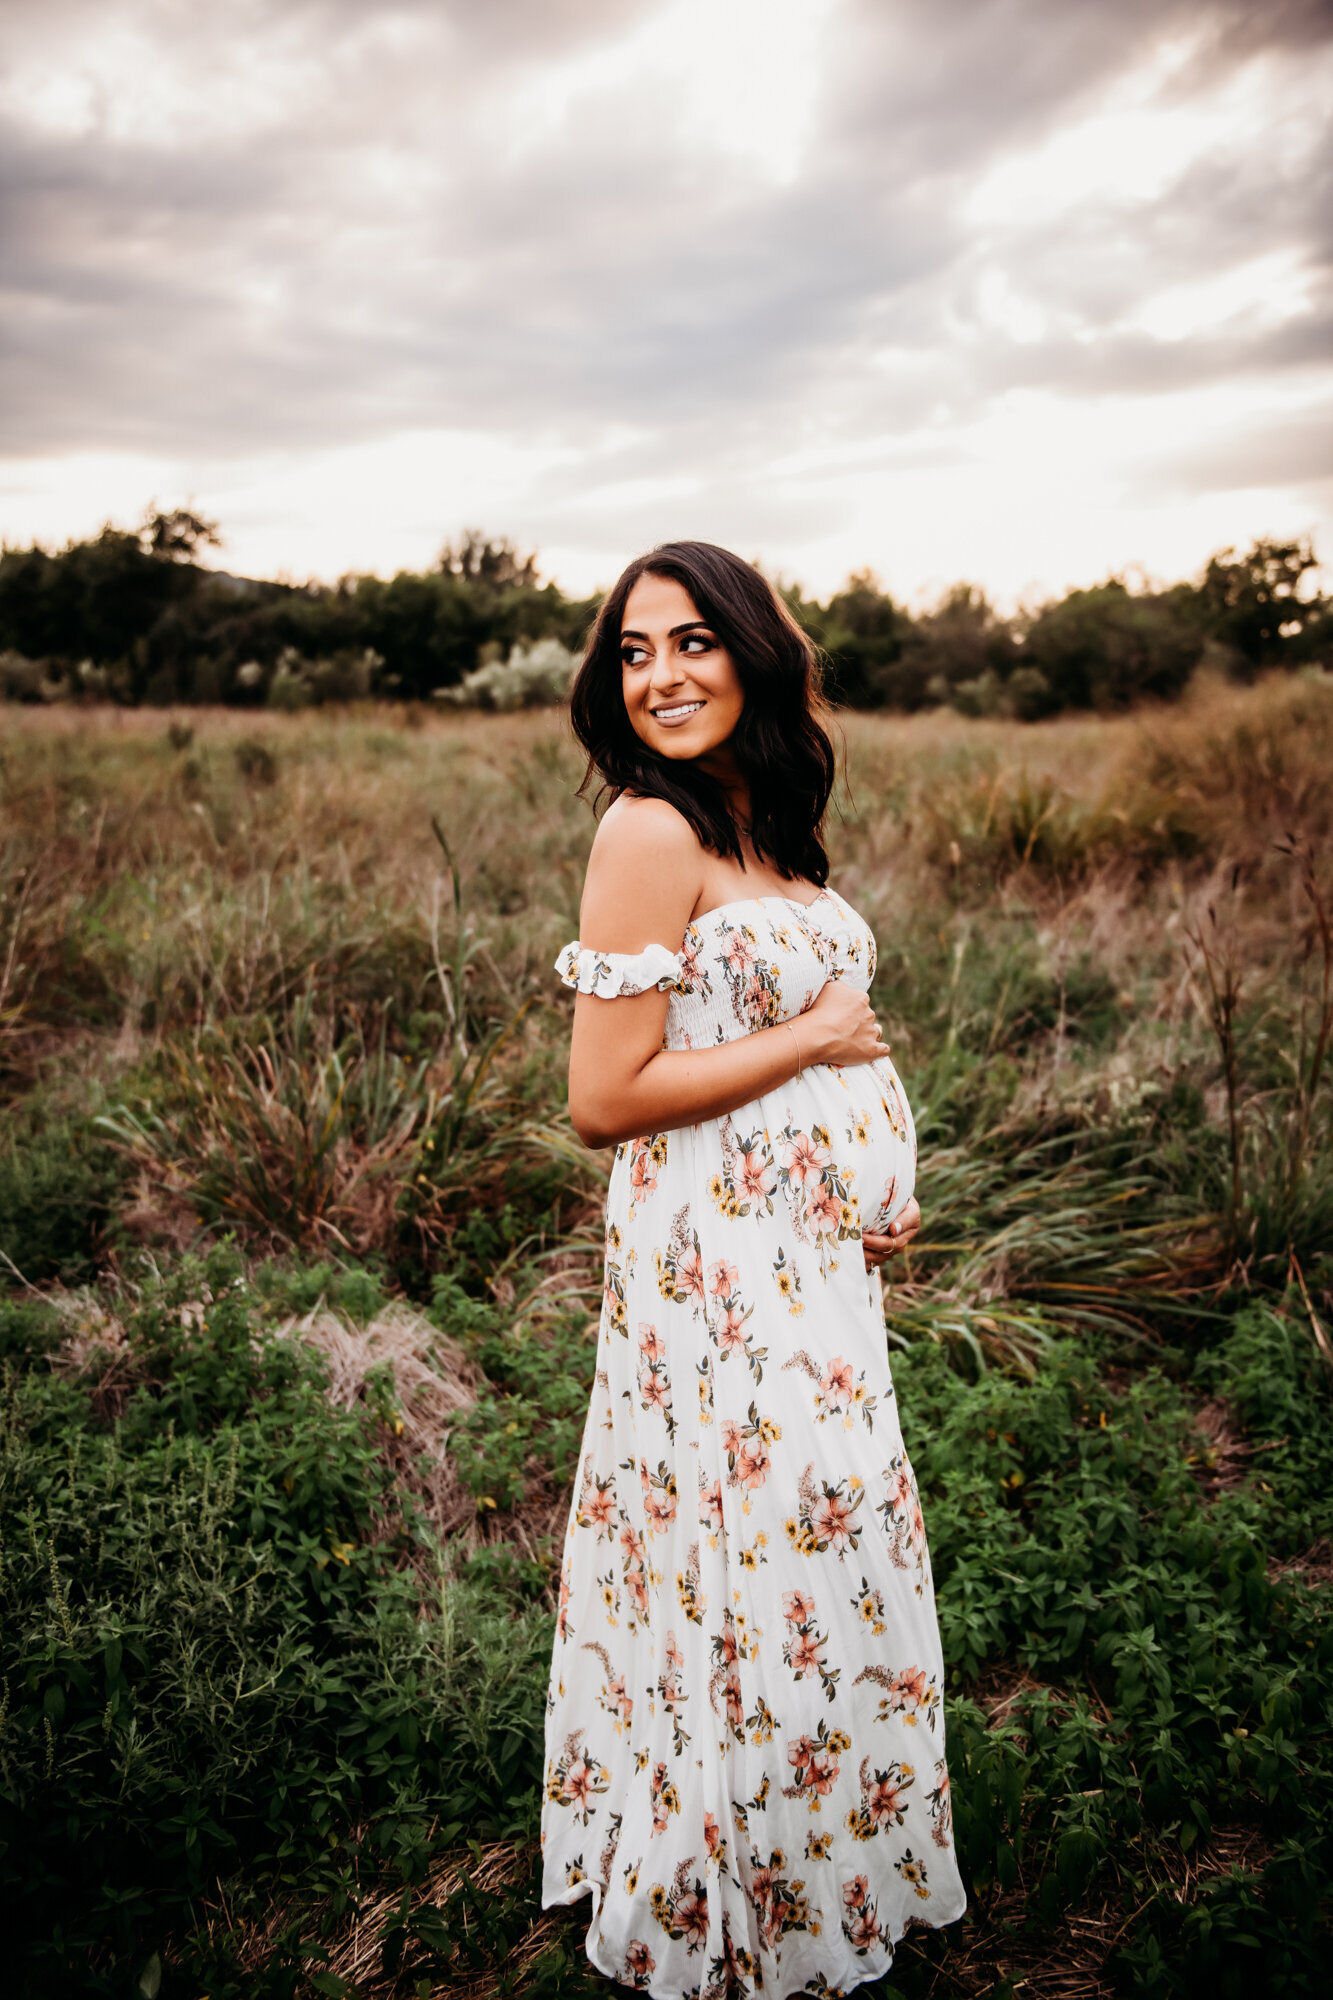 Maternity Photographer, A pregnant woman in a floral dress is standing in a field as she looks over her shoulder and smiles.